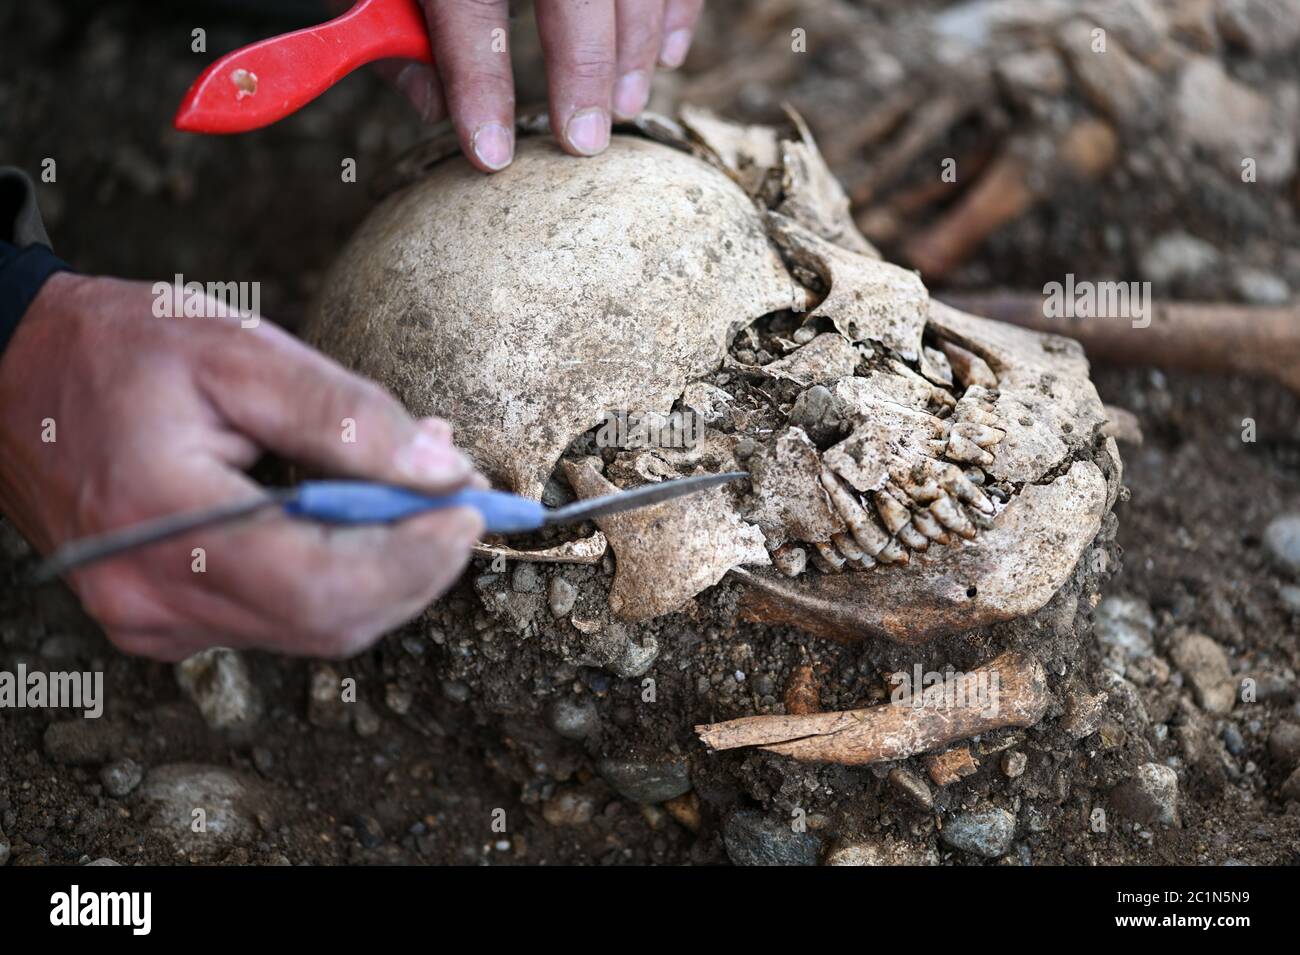 Allensbach, Germany. 04th June, 2020. District archaeologist and excavation director Jürgen Hald excavates parts of skeletons at the historical execution site not far from the Gnadensee (part of Lake Constance). Archaeologists have found the remains of a gallows, several skeletons and cremation pits there. (to dpa: 'Death on the gallows - archaeologists discover execution site at Lake Constance') Credit: Felix Kästle/dpa/Alamy Live News Stock Photo